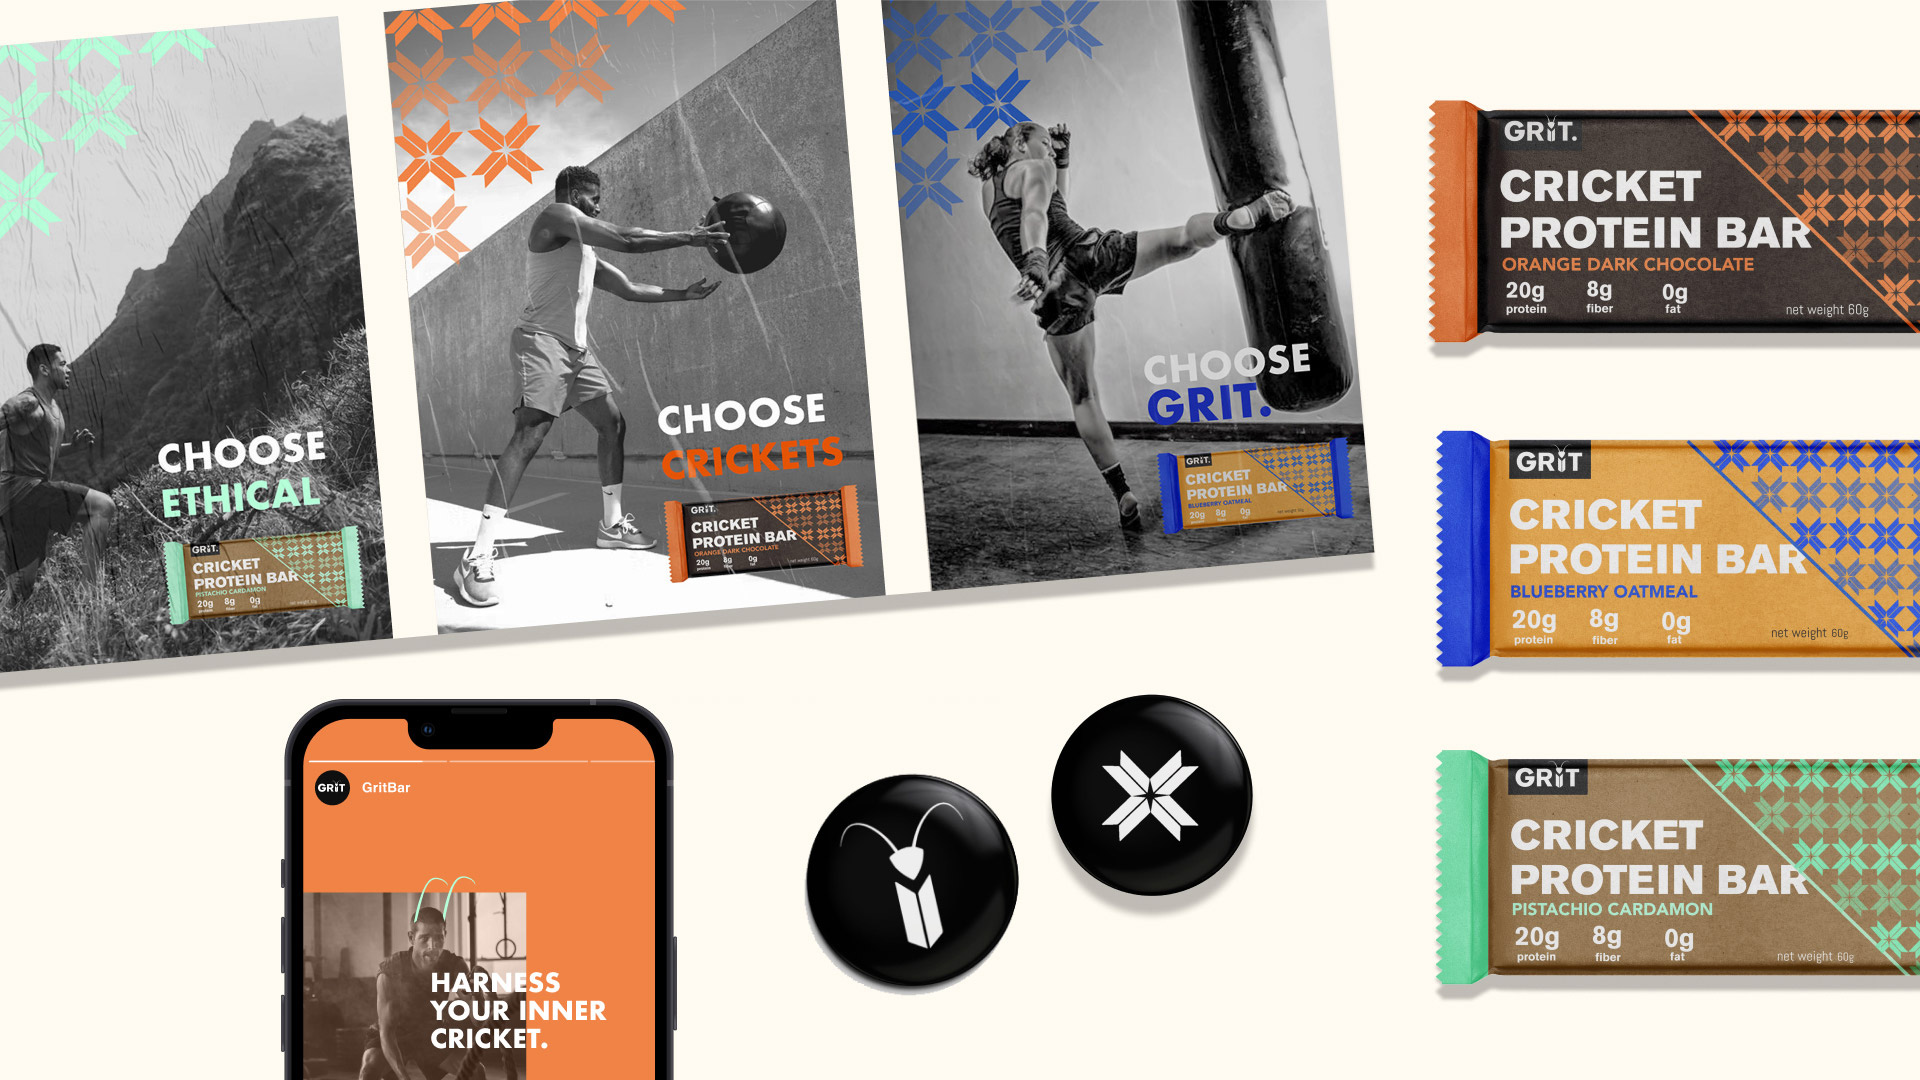 Branding collateral for Grit cricket protein, which includes buttons, kraft paper packaging, and advertisement in a tri-posters series and an Instagram story.